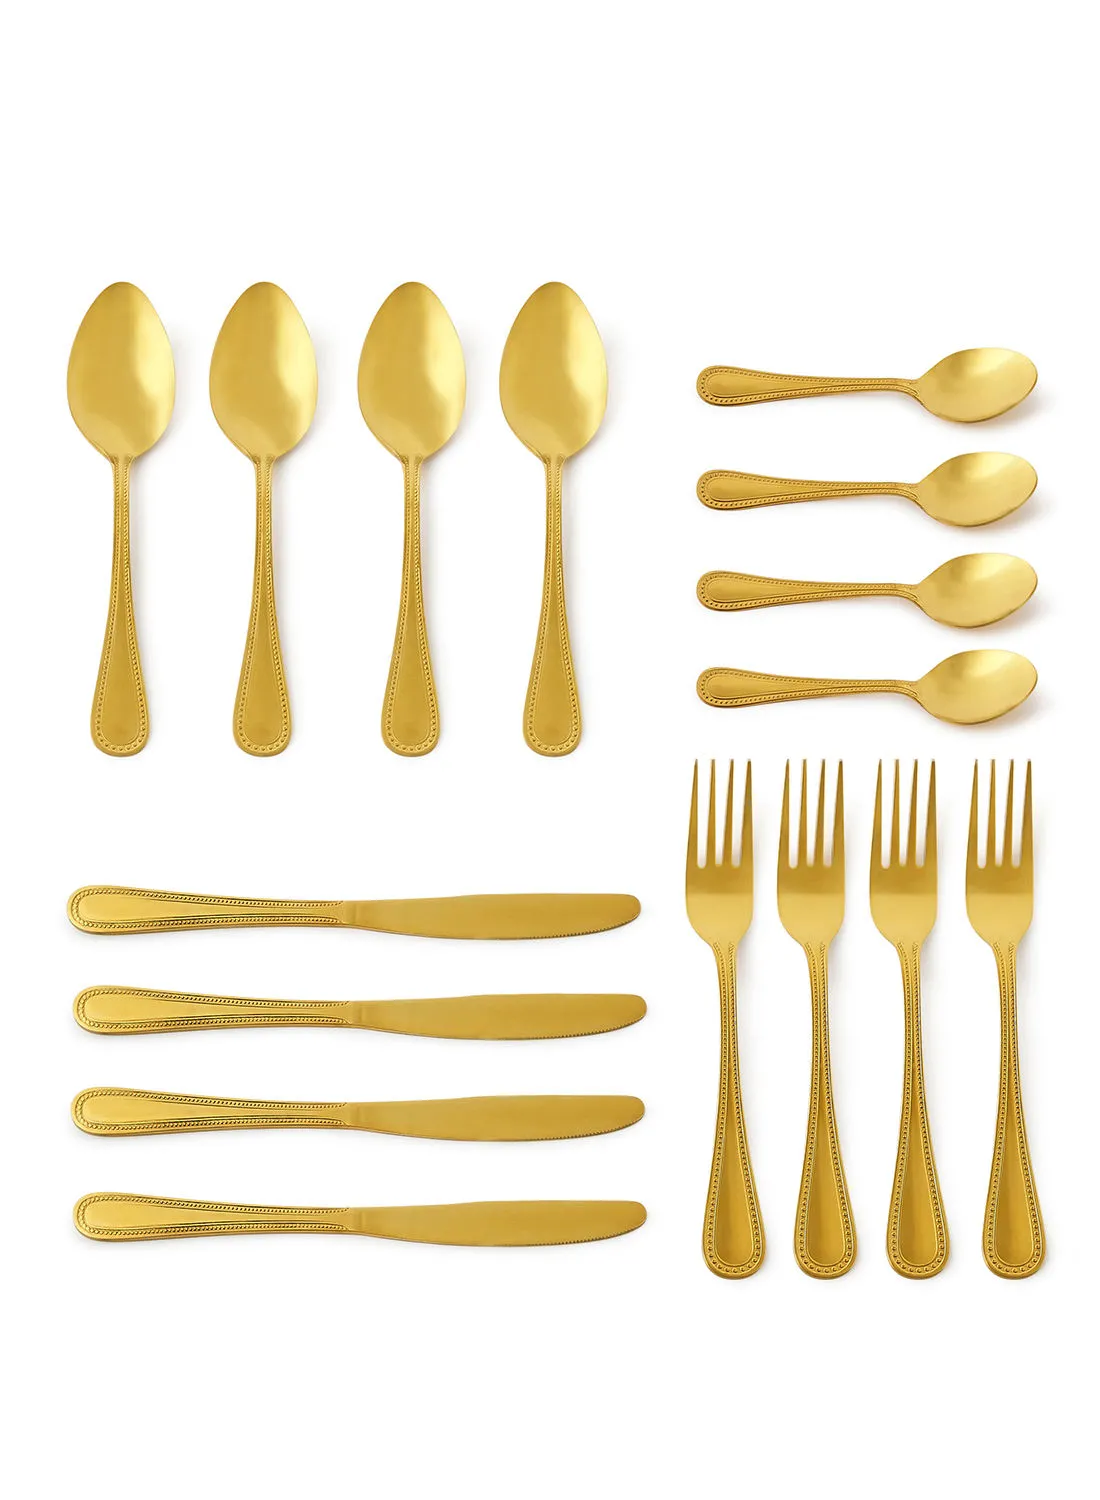 Amal 16 Piece Cutlery Set - Made Of Stainless Steel - Silverware Flatware - Spoons And Forks Set, Spoon Set - Table Spoons, Tea Spoons, Forks, Knives - Serves 4 - Design Gold Mallow